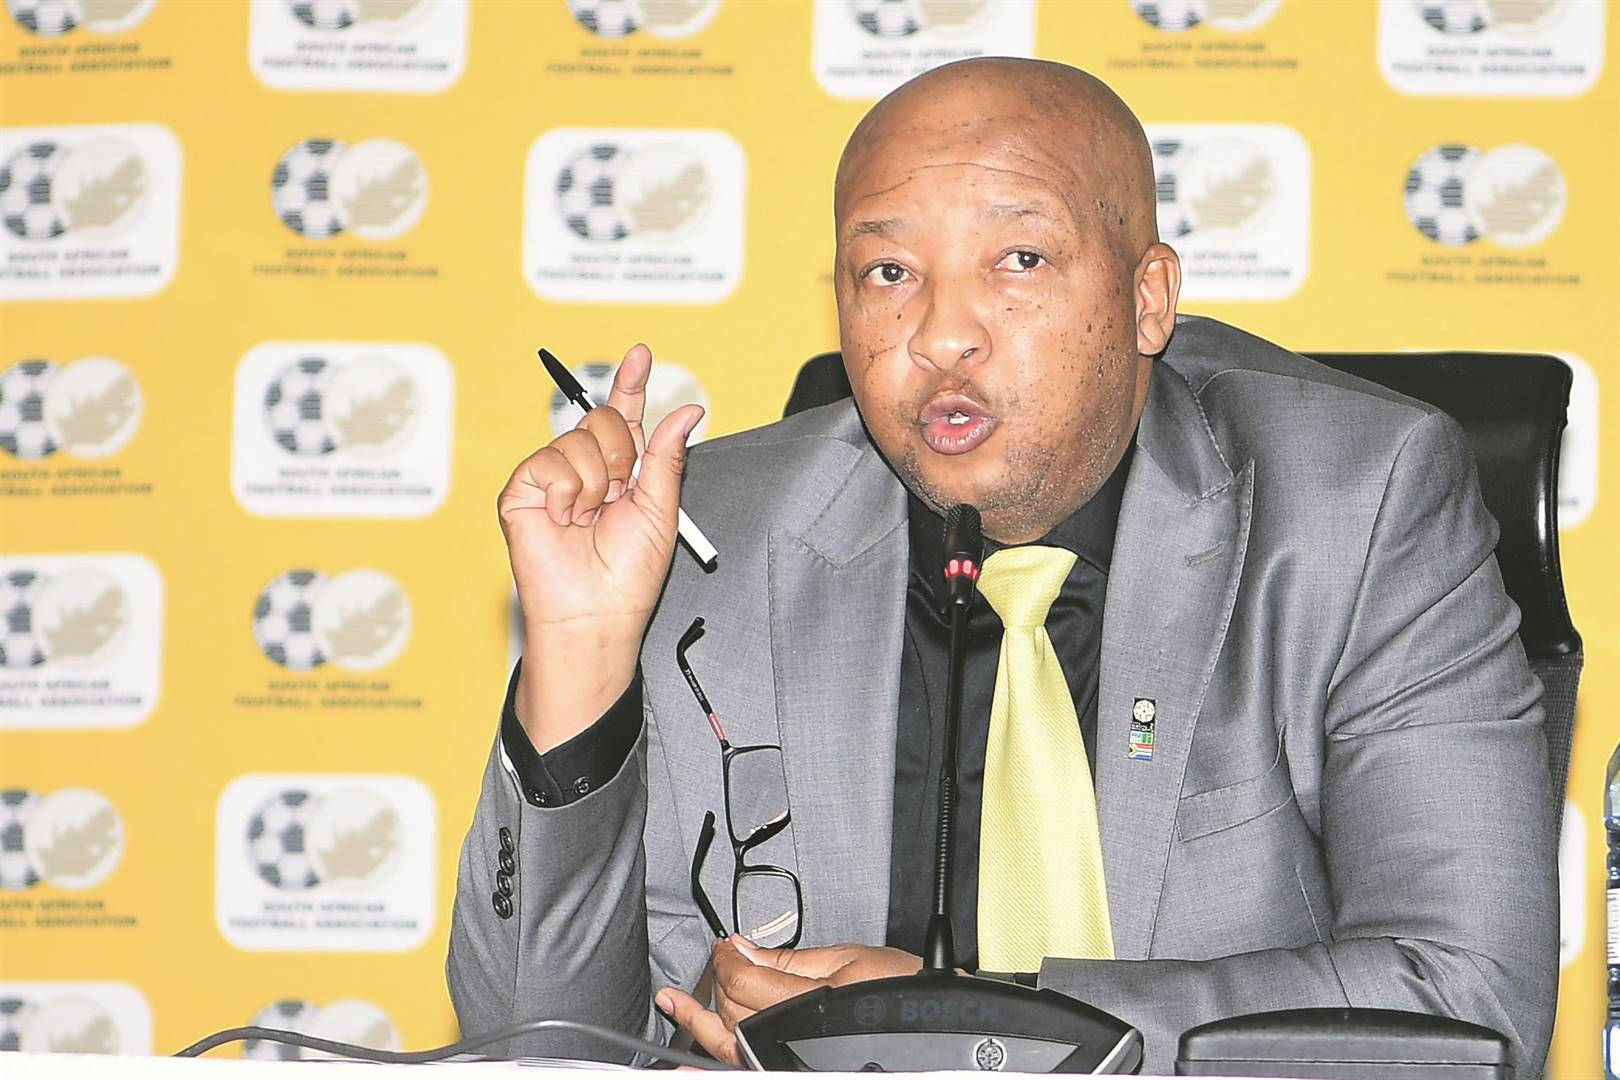 Safa technical director Walter Steenbok is allegedly living on borrowed time 